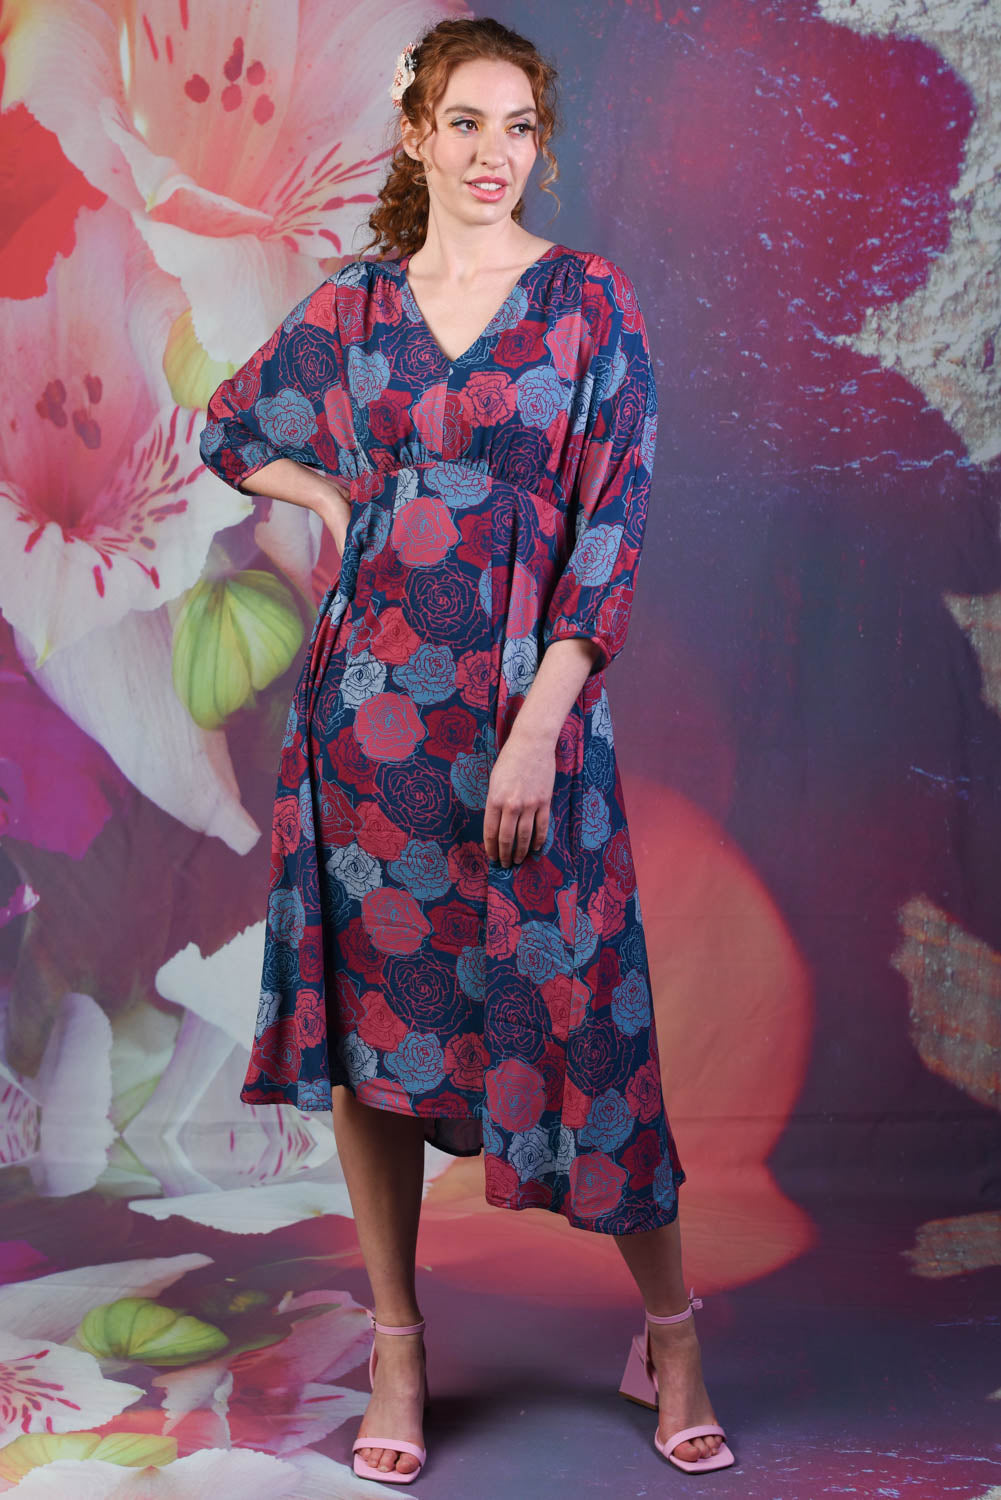 Model wearing the Peony Love dress by Annah Stretton